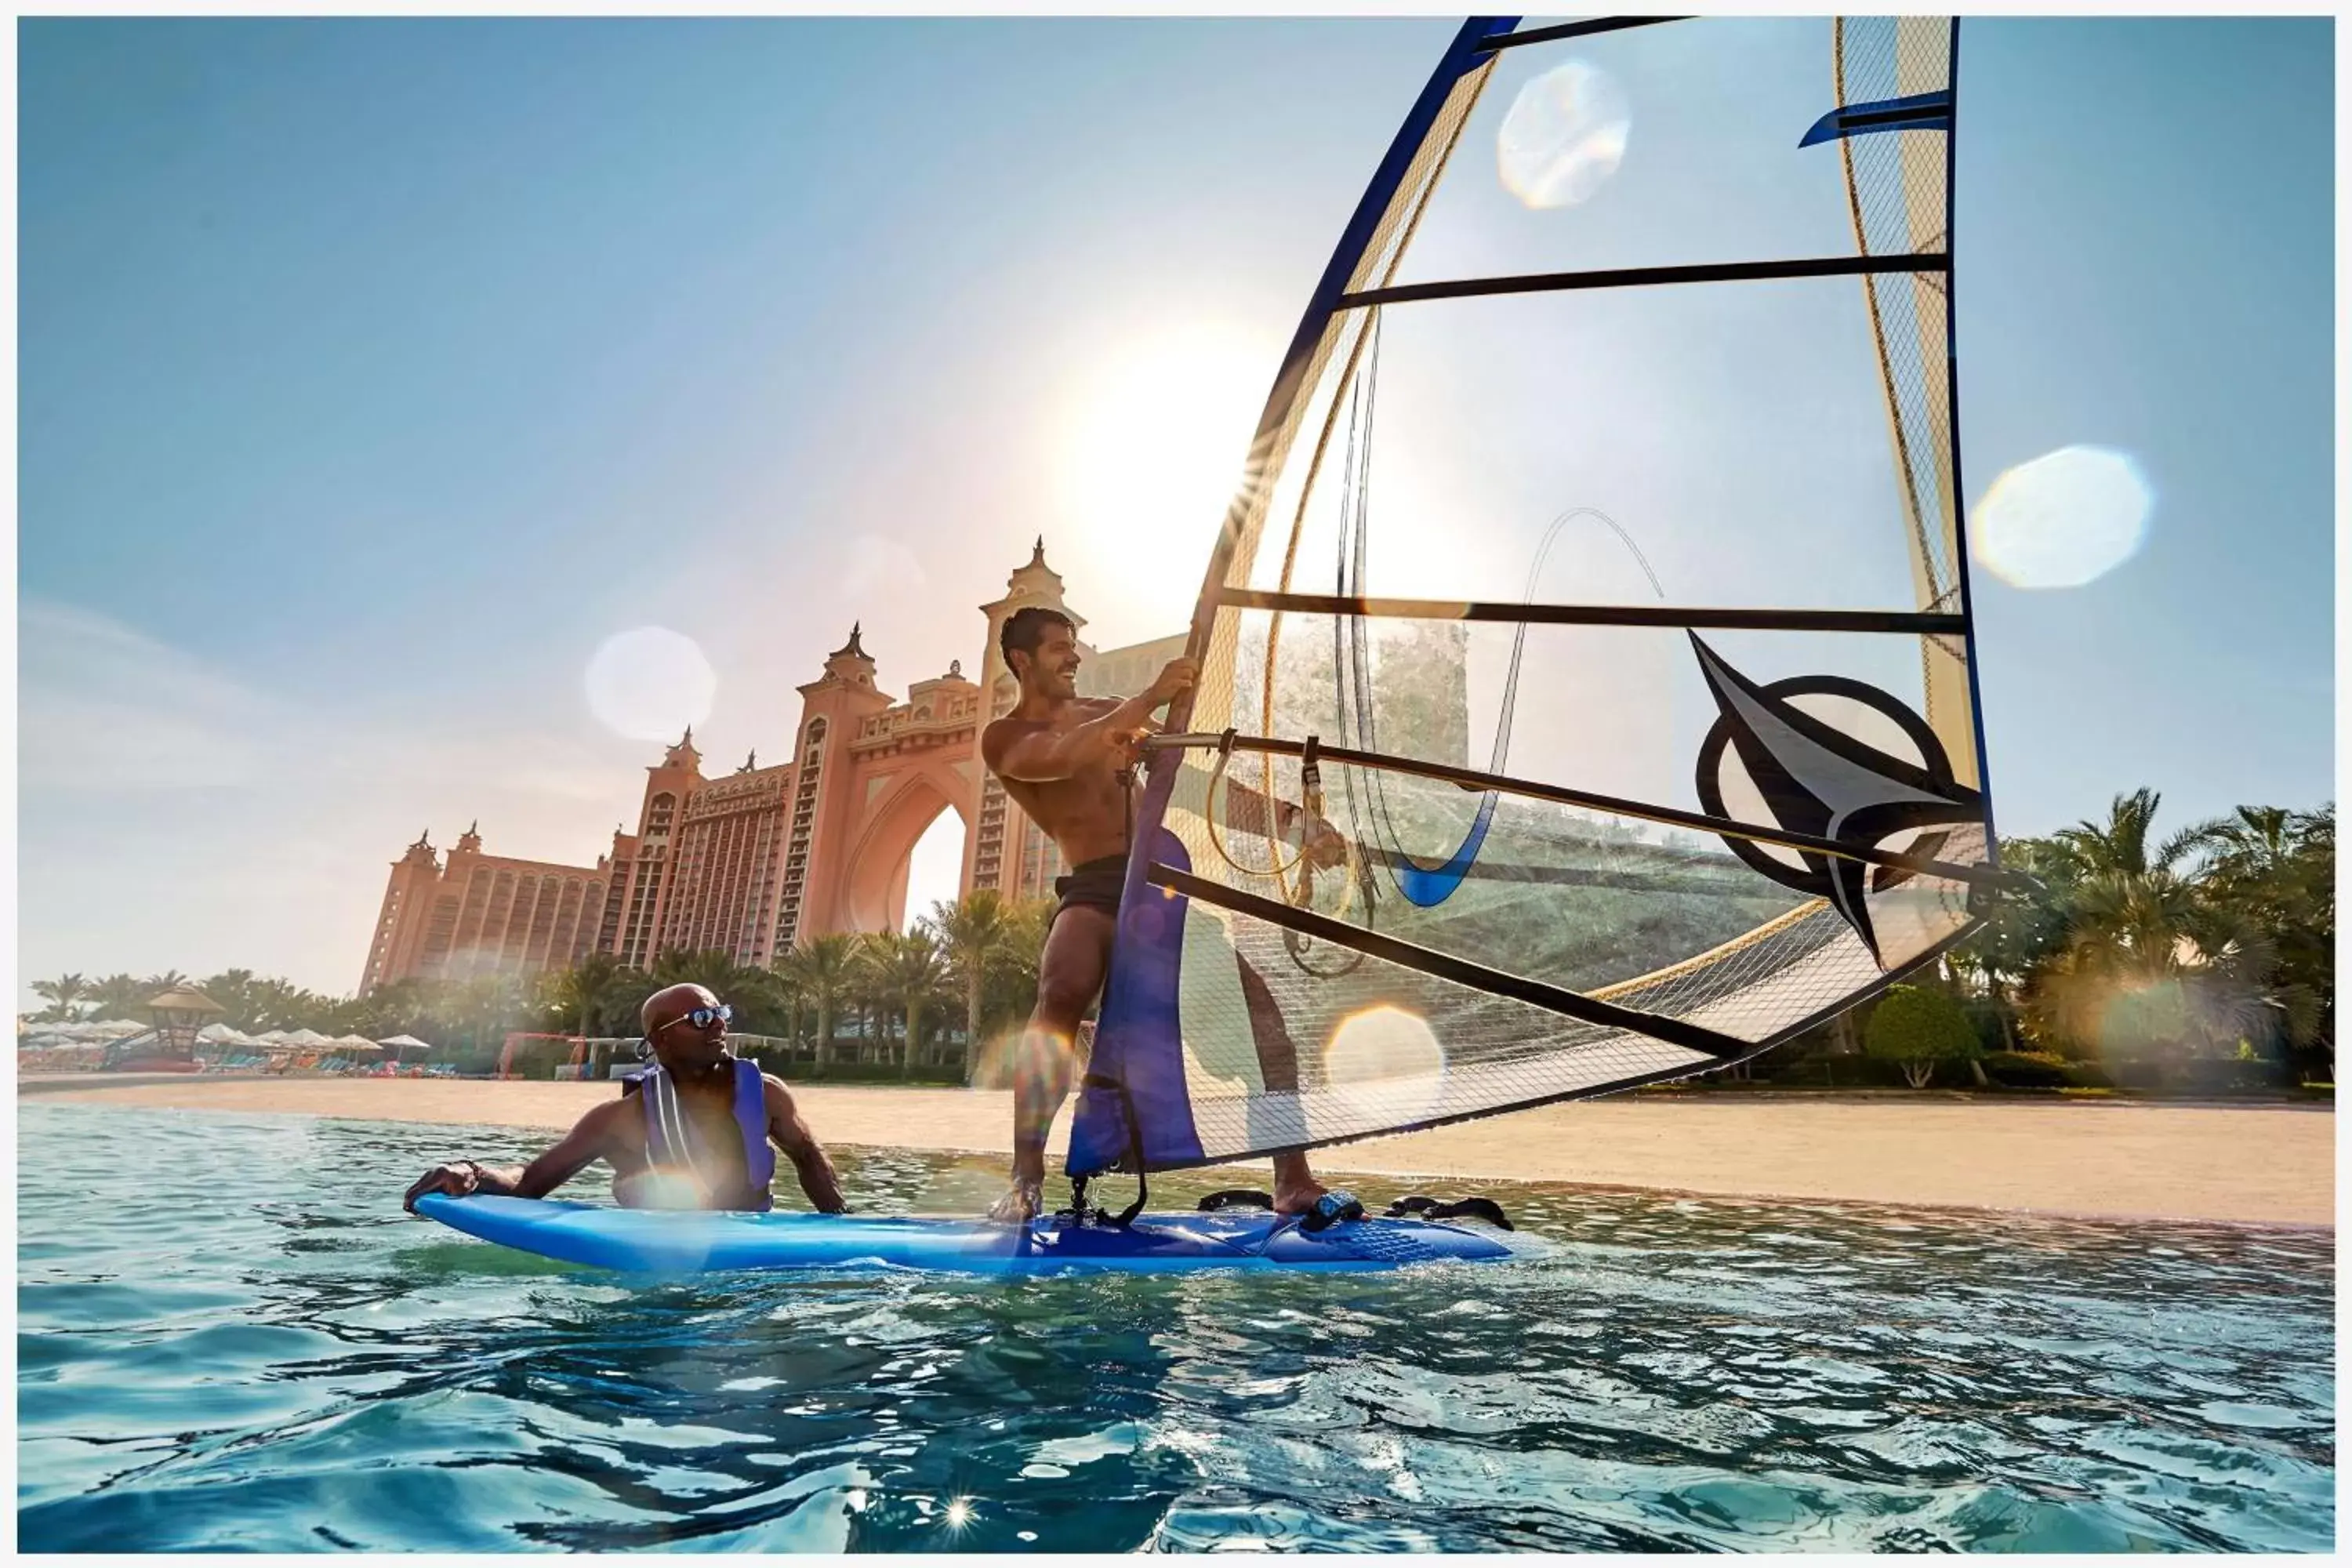 Sports in Atlantis, The Palm